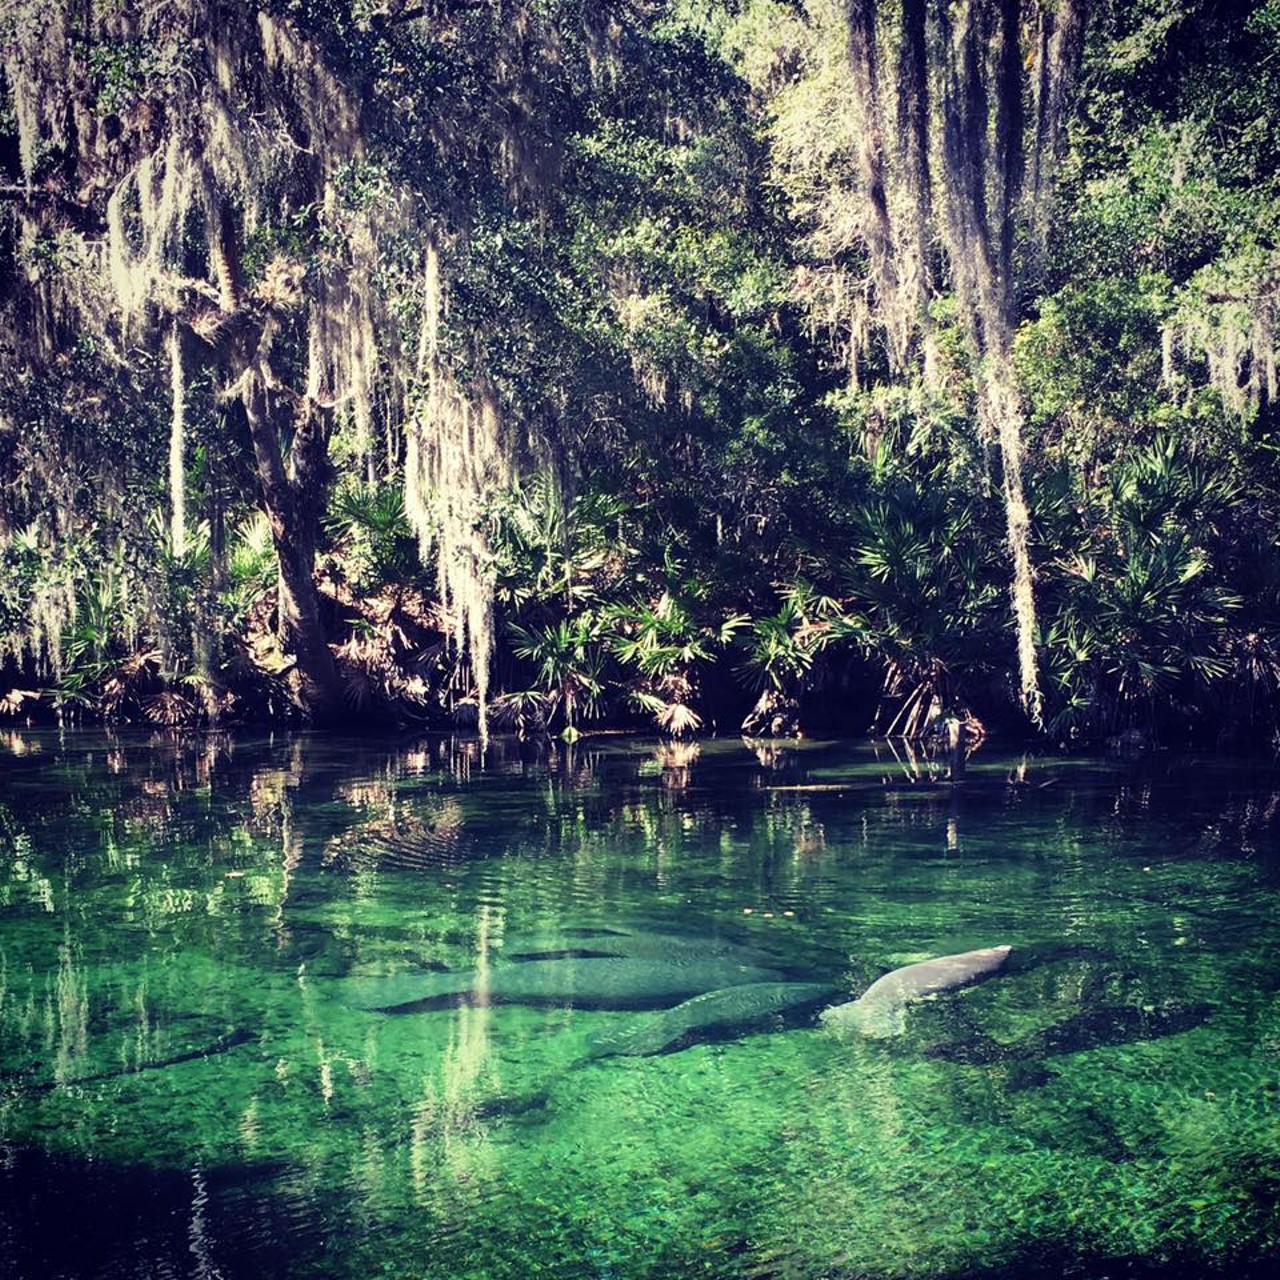 Blue Spring State Park
Distance from Orlando: 45 minutes
Blue Spring is a manatee refugee that comes equipped with cabins as well as sites for RVs and tents. Manatee viewing is of course the main activity, but you can also scuba dive (with certification), snorkel, or go on a boat tour of the St. Johns River. 
Photo via Blue Spring State Park/Facebook